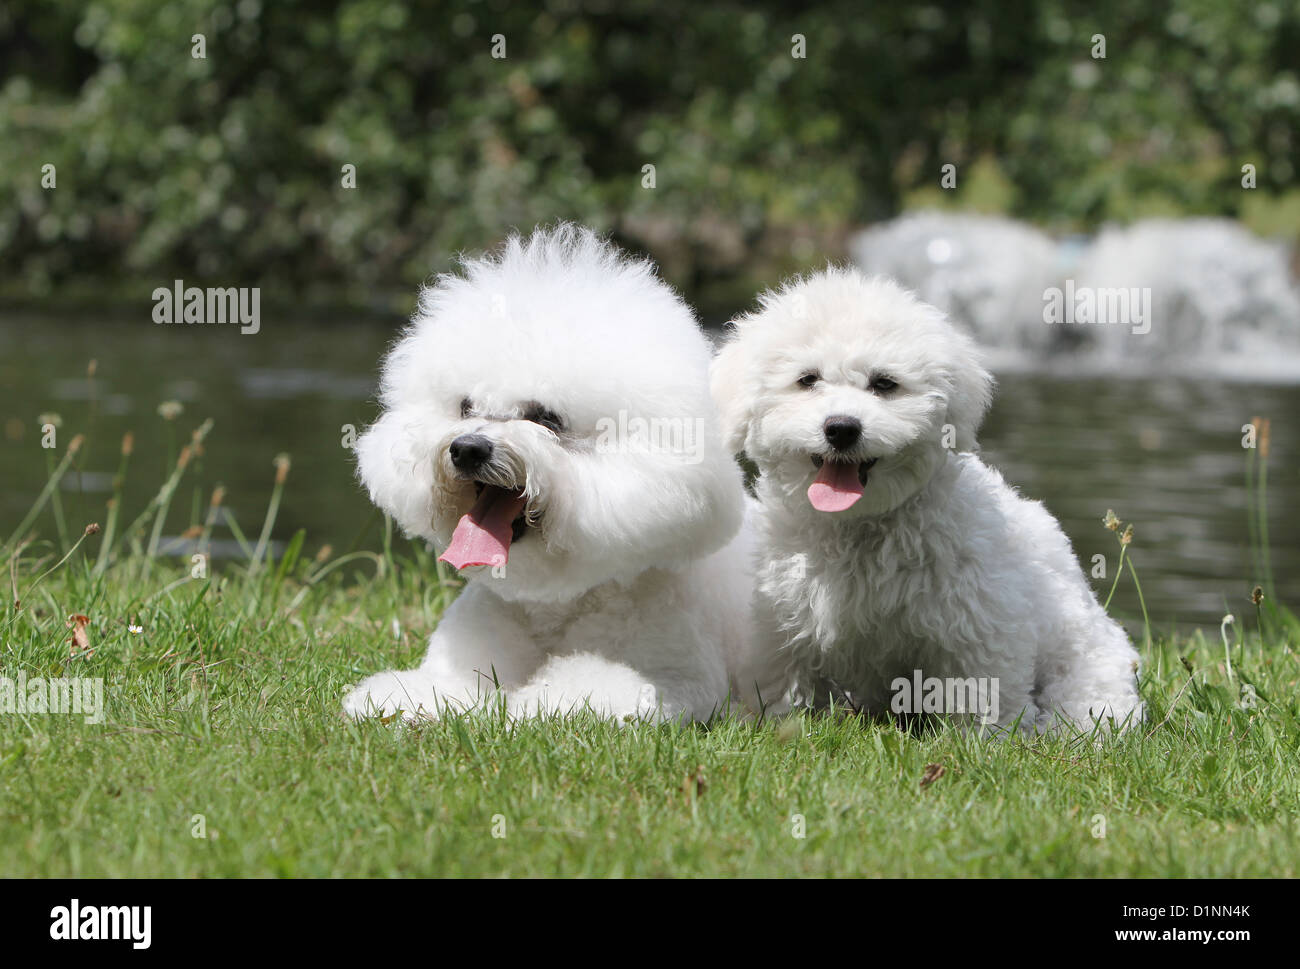 Dog Bichon Frise adult and puppy lying on grass Stock Photo